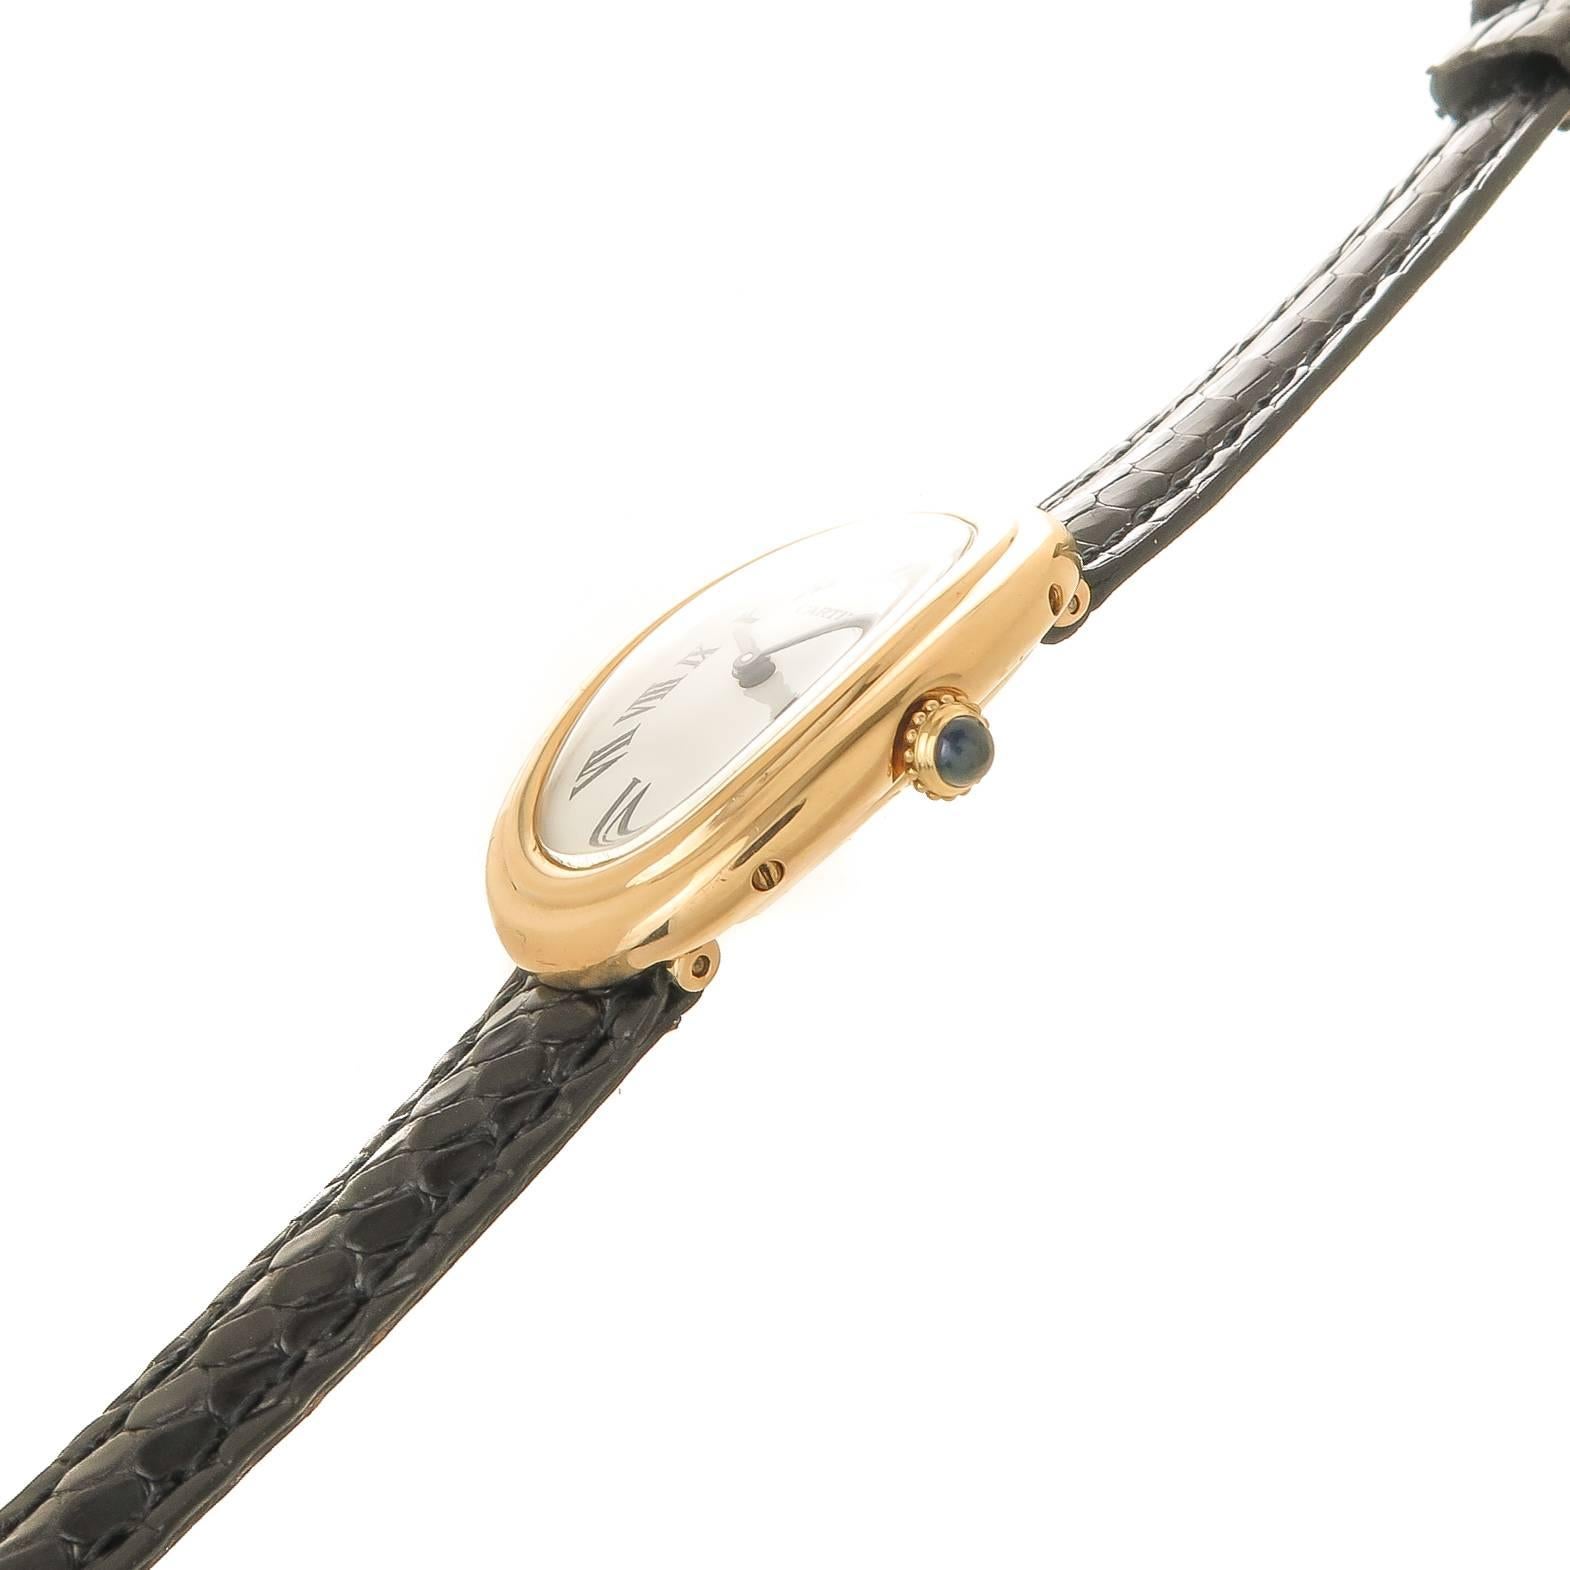 Circa 1980 Cartier Ladies Baignoire Wrist Watch, 31 X 22 MM 18K Yellow Gold Oval case, 6 MM thick. 17 Jewel Mechanical, Manual wind Cartier Movement, White dial with Black roman numerals, sapphire crown. New ( replaced ) Black Lizard strap. Watch